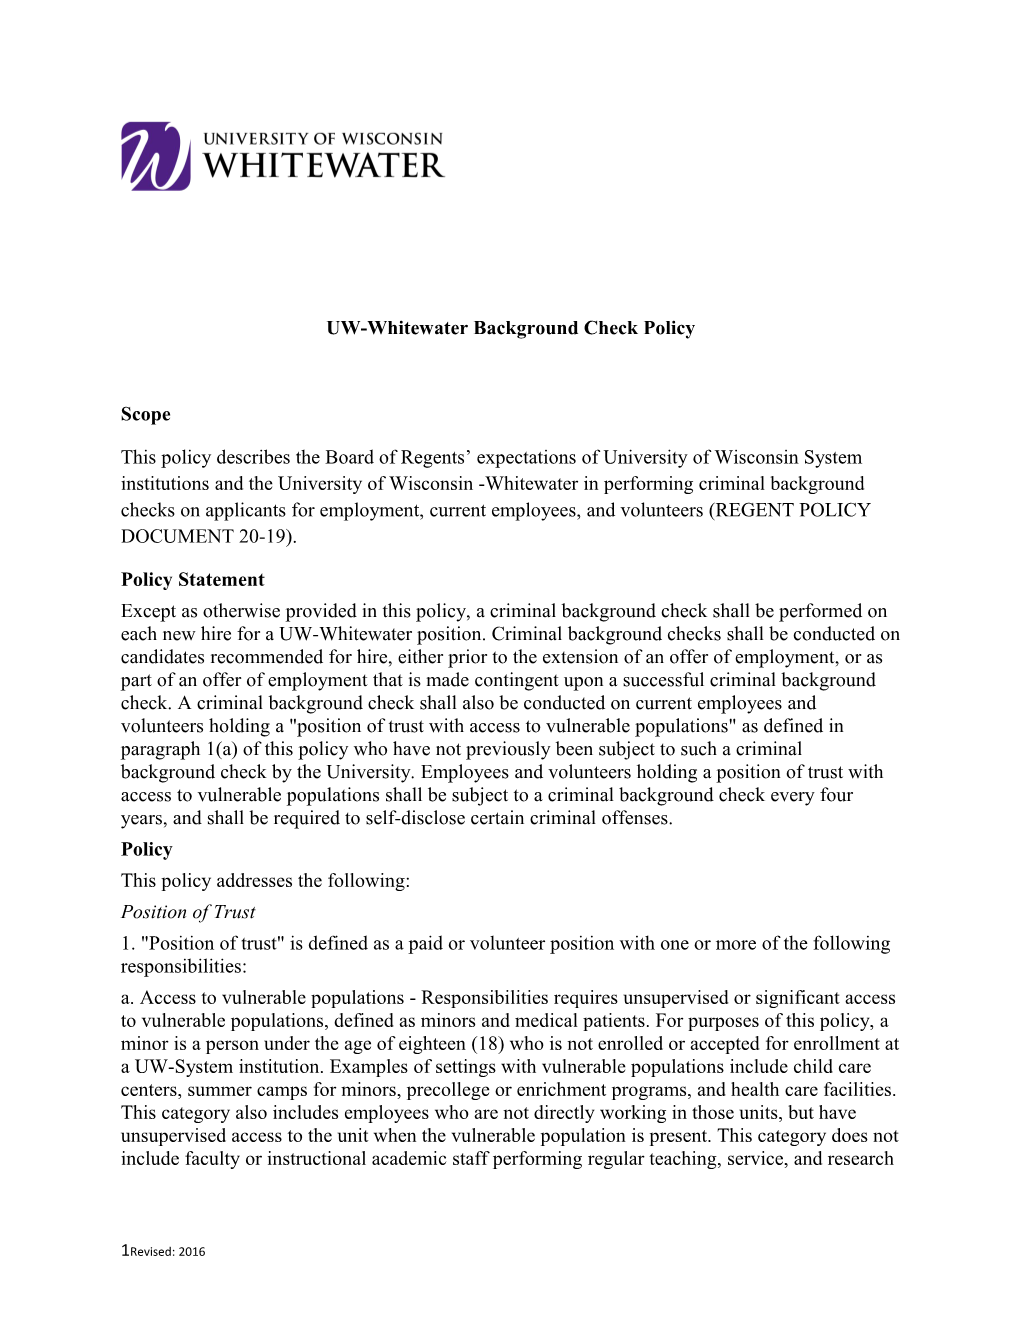 UW-Whitewater Background Check Policy